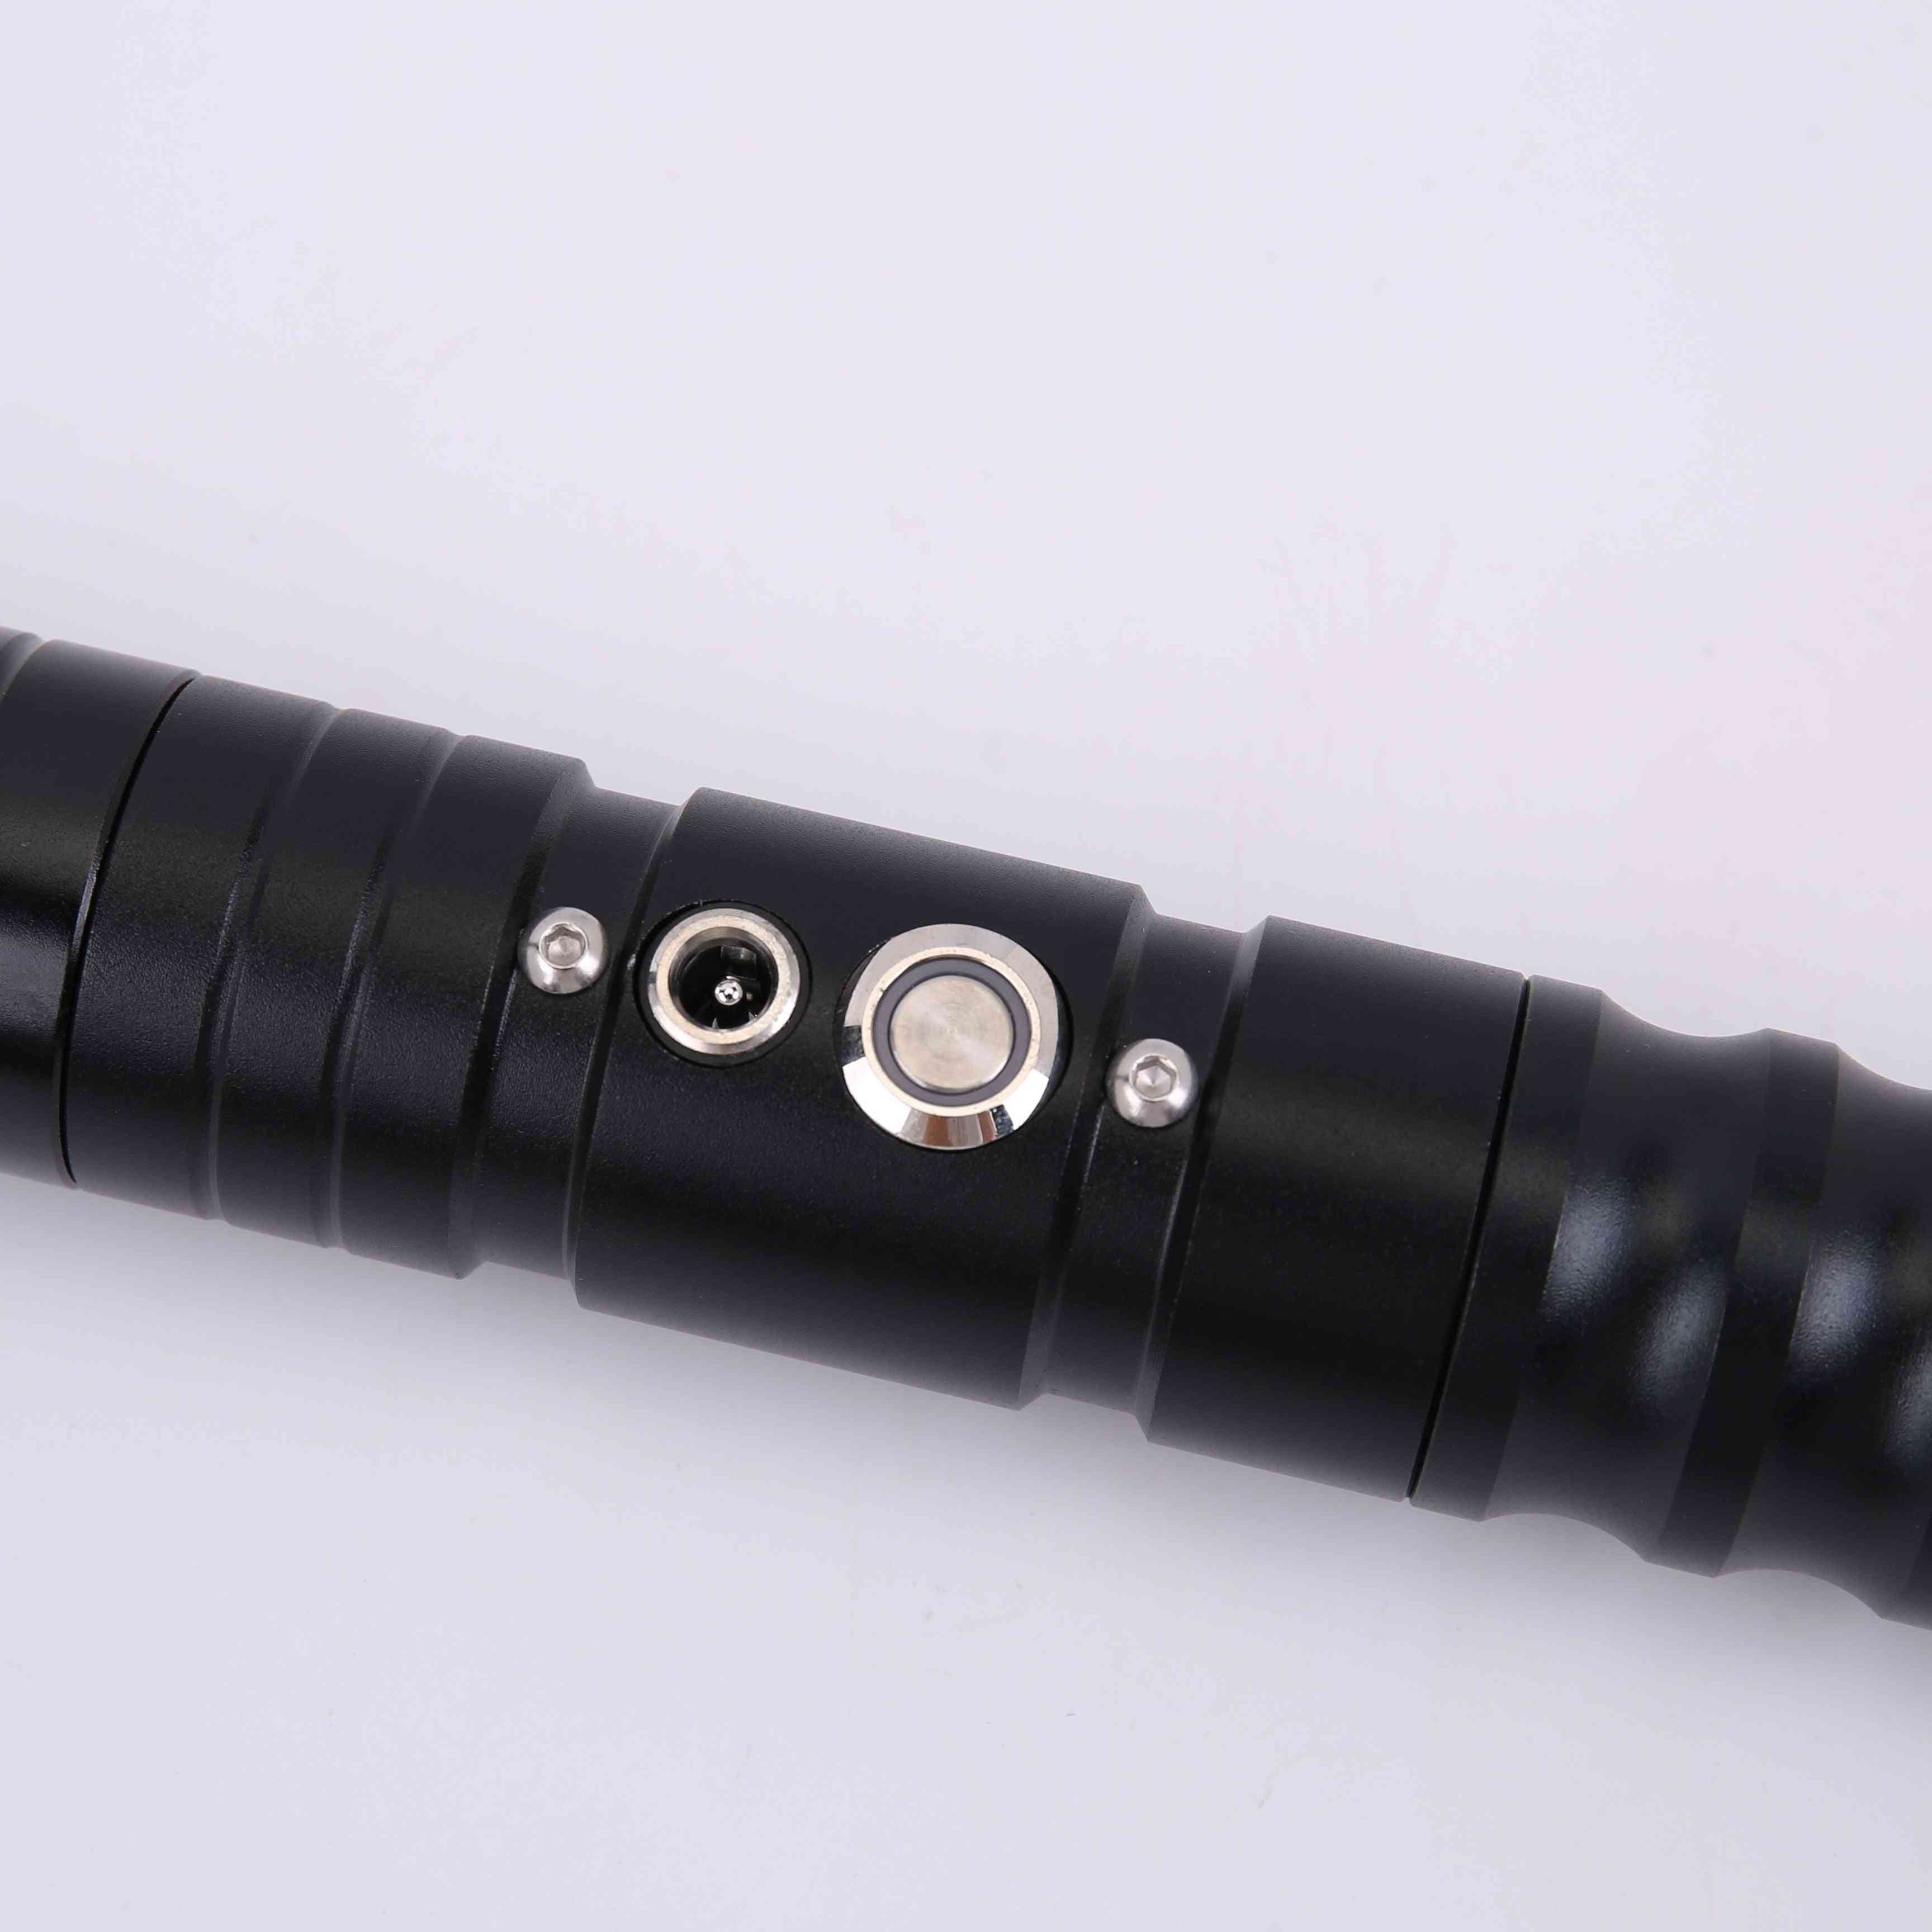 Eco Rgb Light, Saber Dueling With Blade Metal Handle, Foc Lock-up, Cosplay Toy